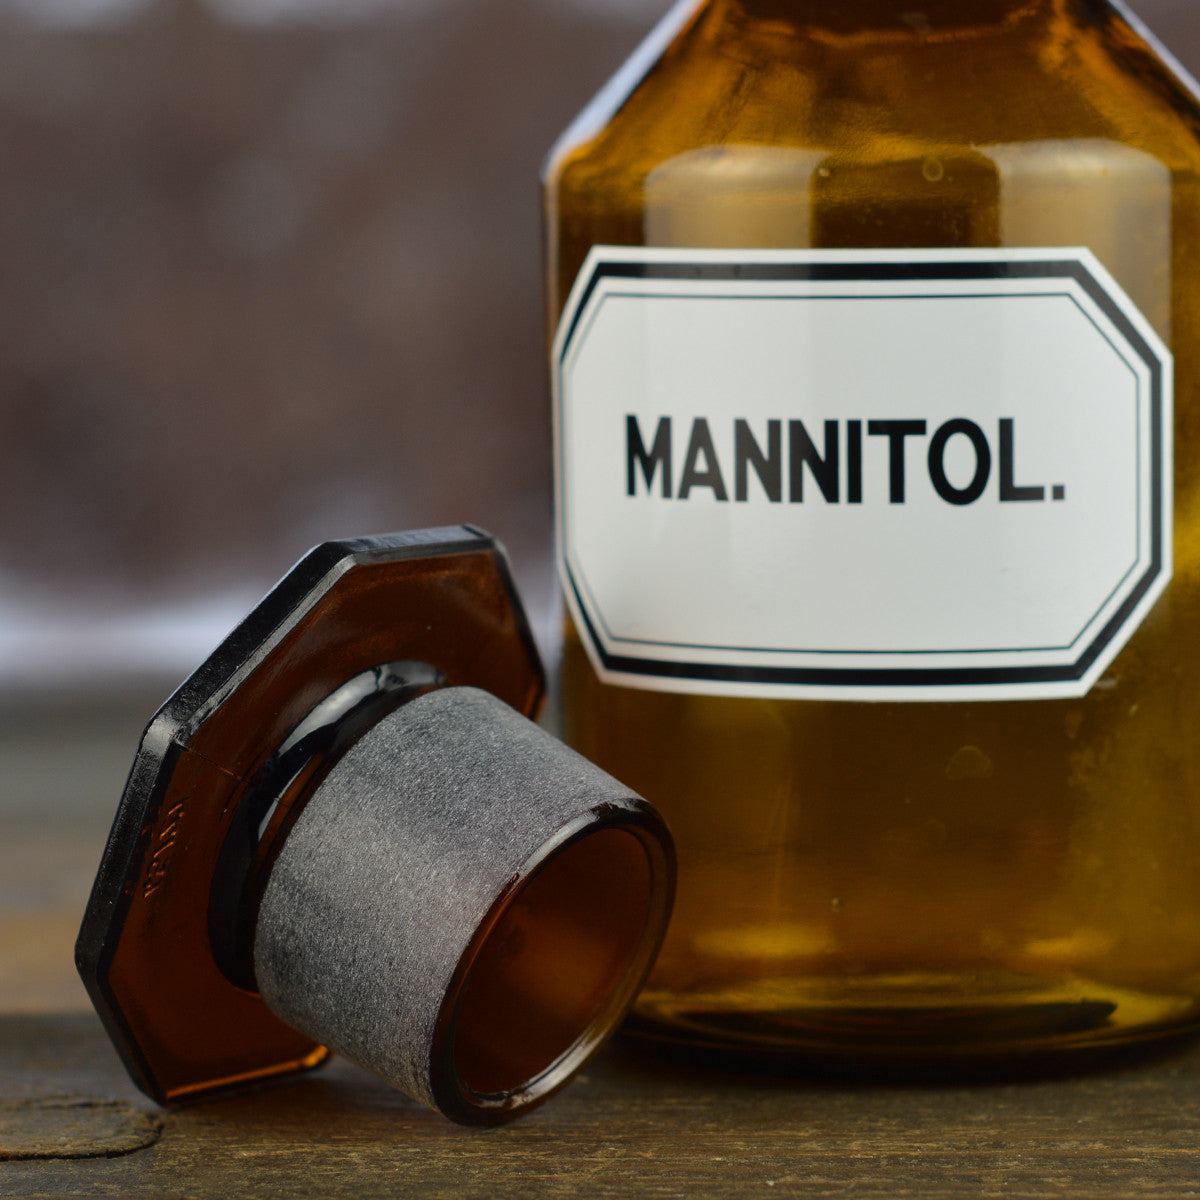 Vintage 1930’s - 1940’s Apothecary Jar with Latin Label MANNITOL. and Hexagon Stopper